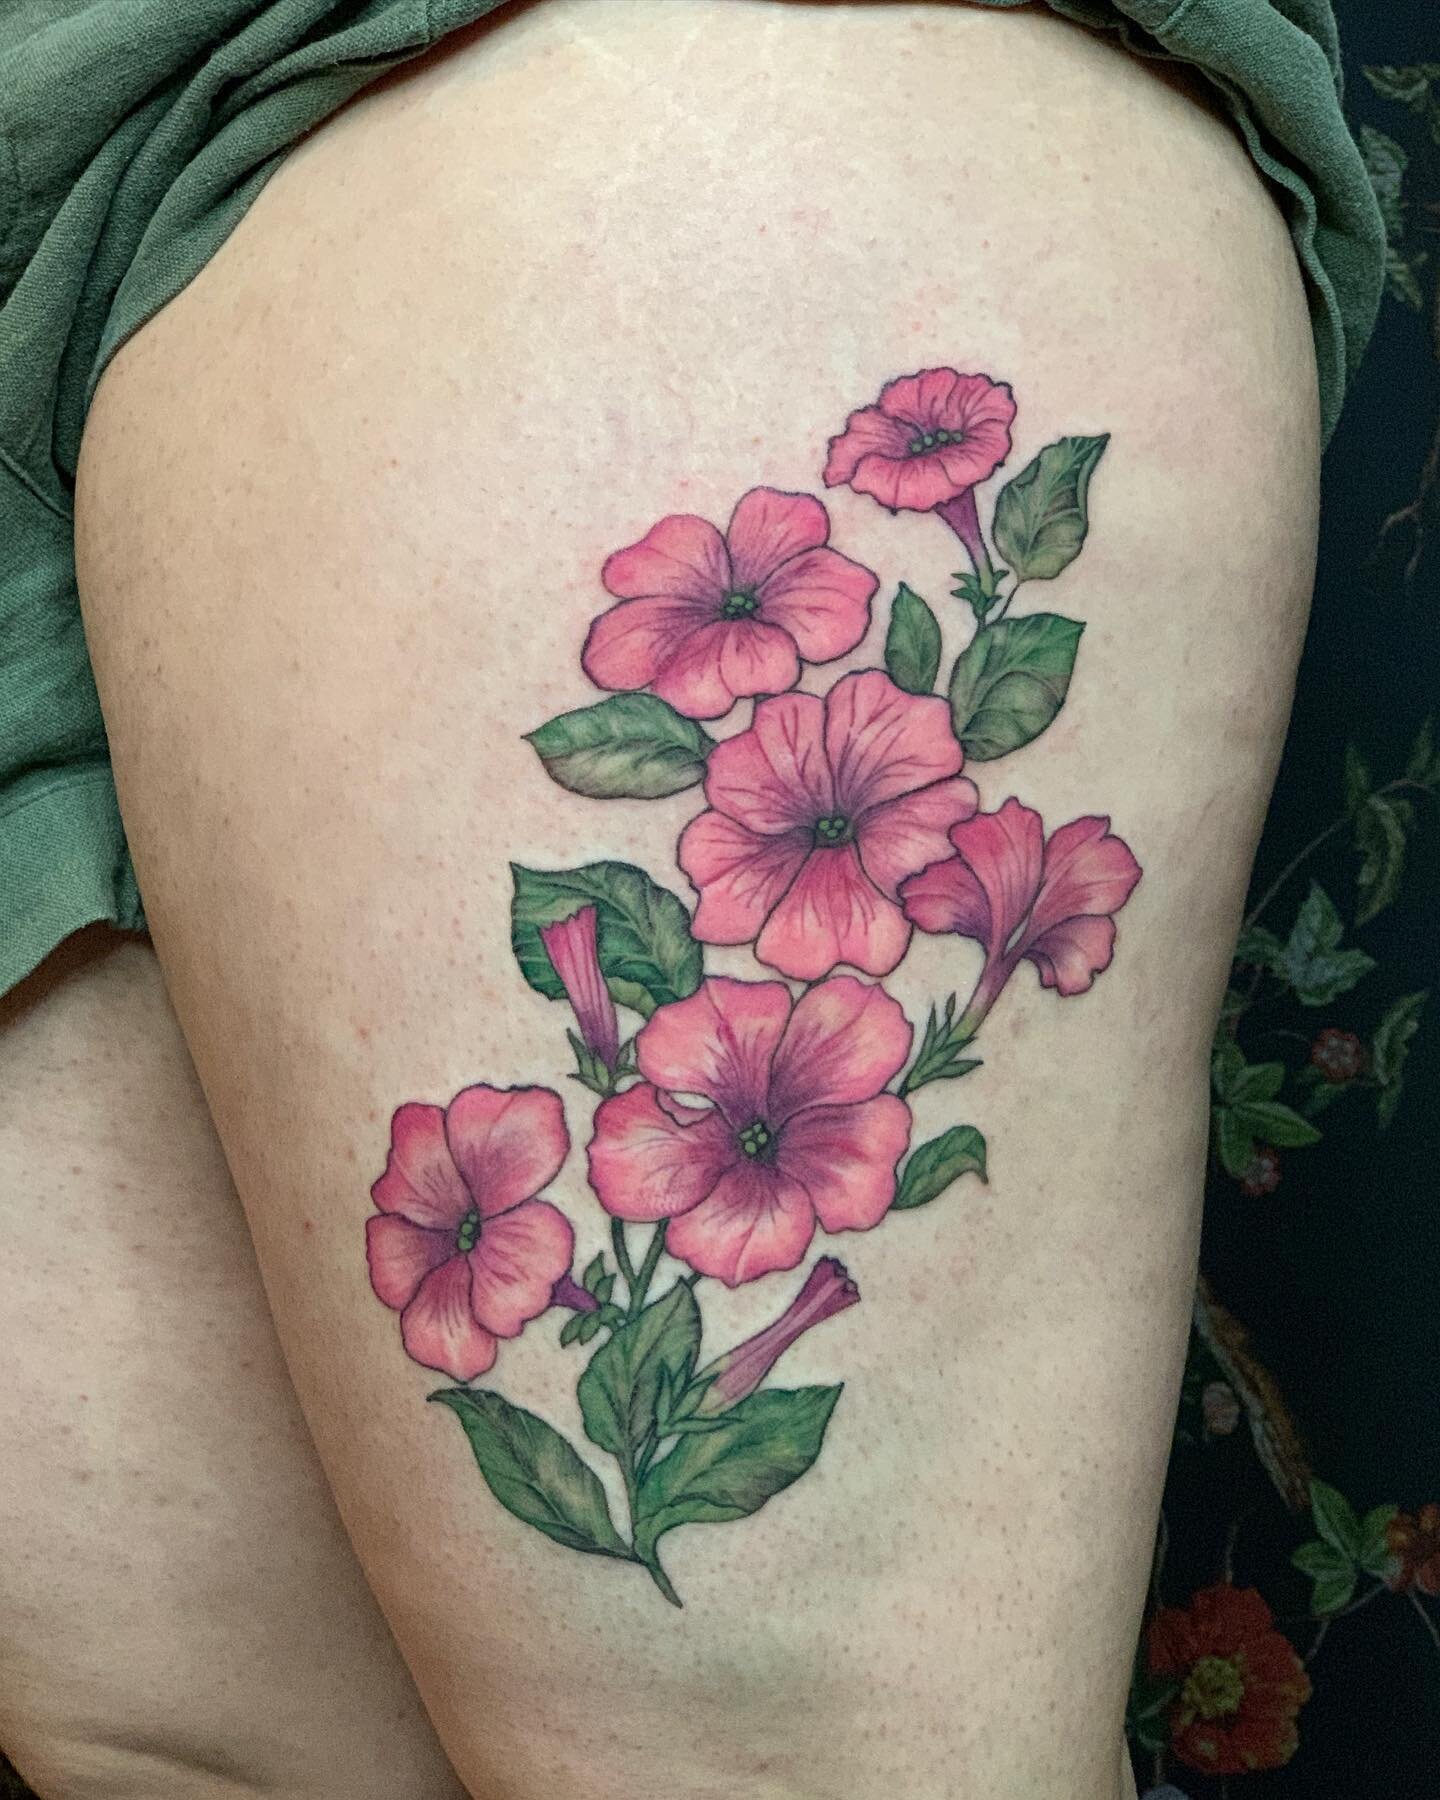 Petunias for Janine 🌺 Thank you Janine, I&rsquo;m so happy to do this tattoo for you!
.
.
.
#petuniatattoo #botanicaltattoo #floraltattoo #petuniaflowers #botanicals